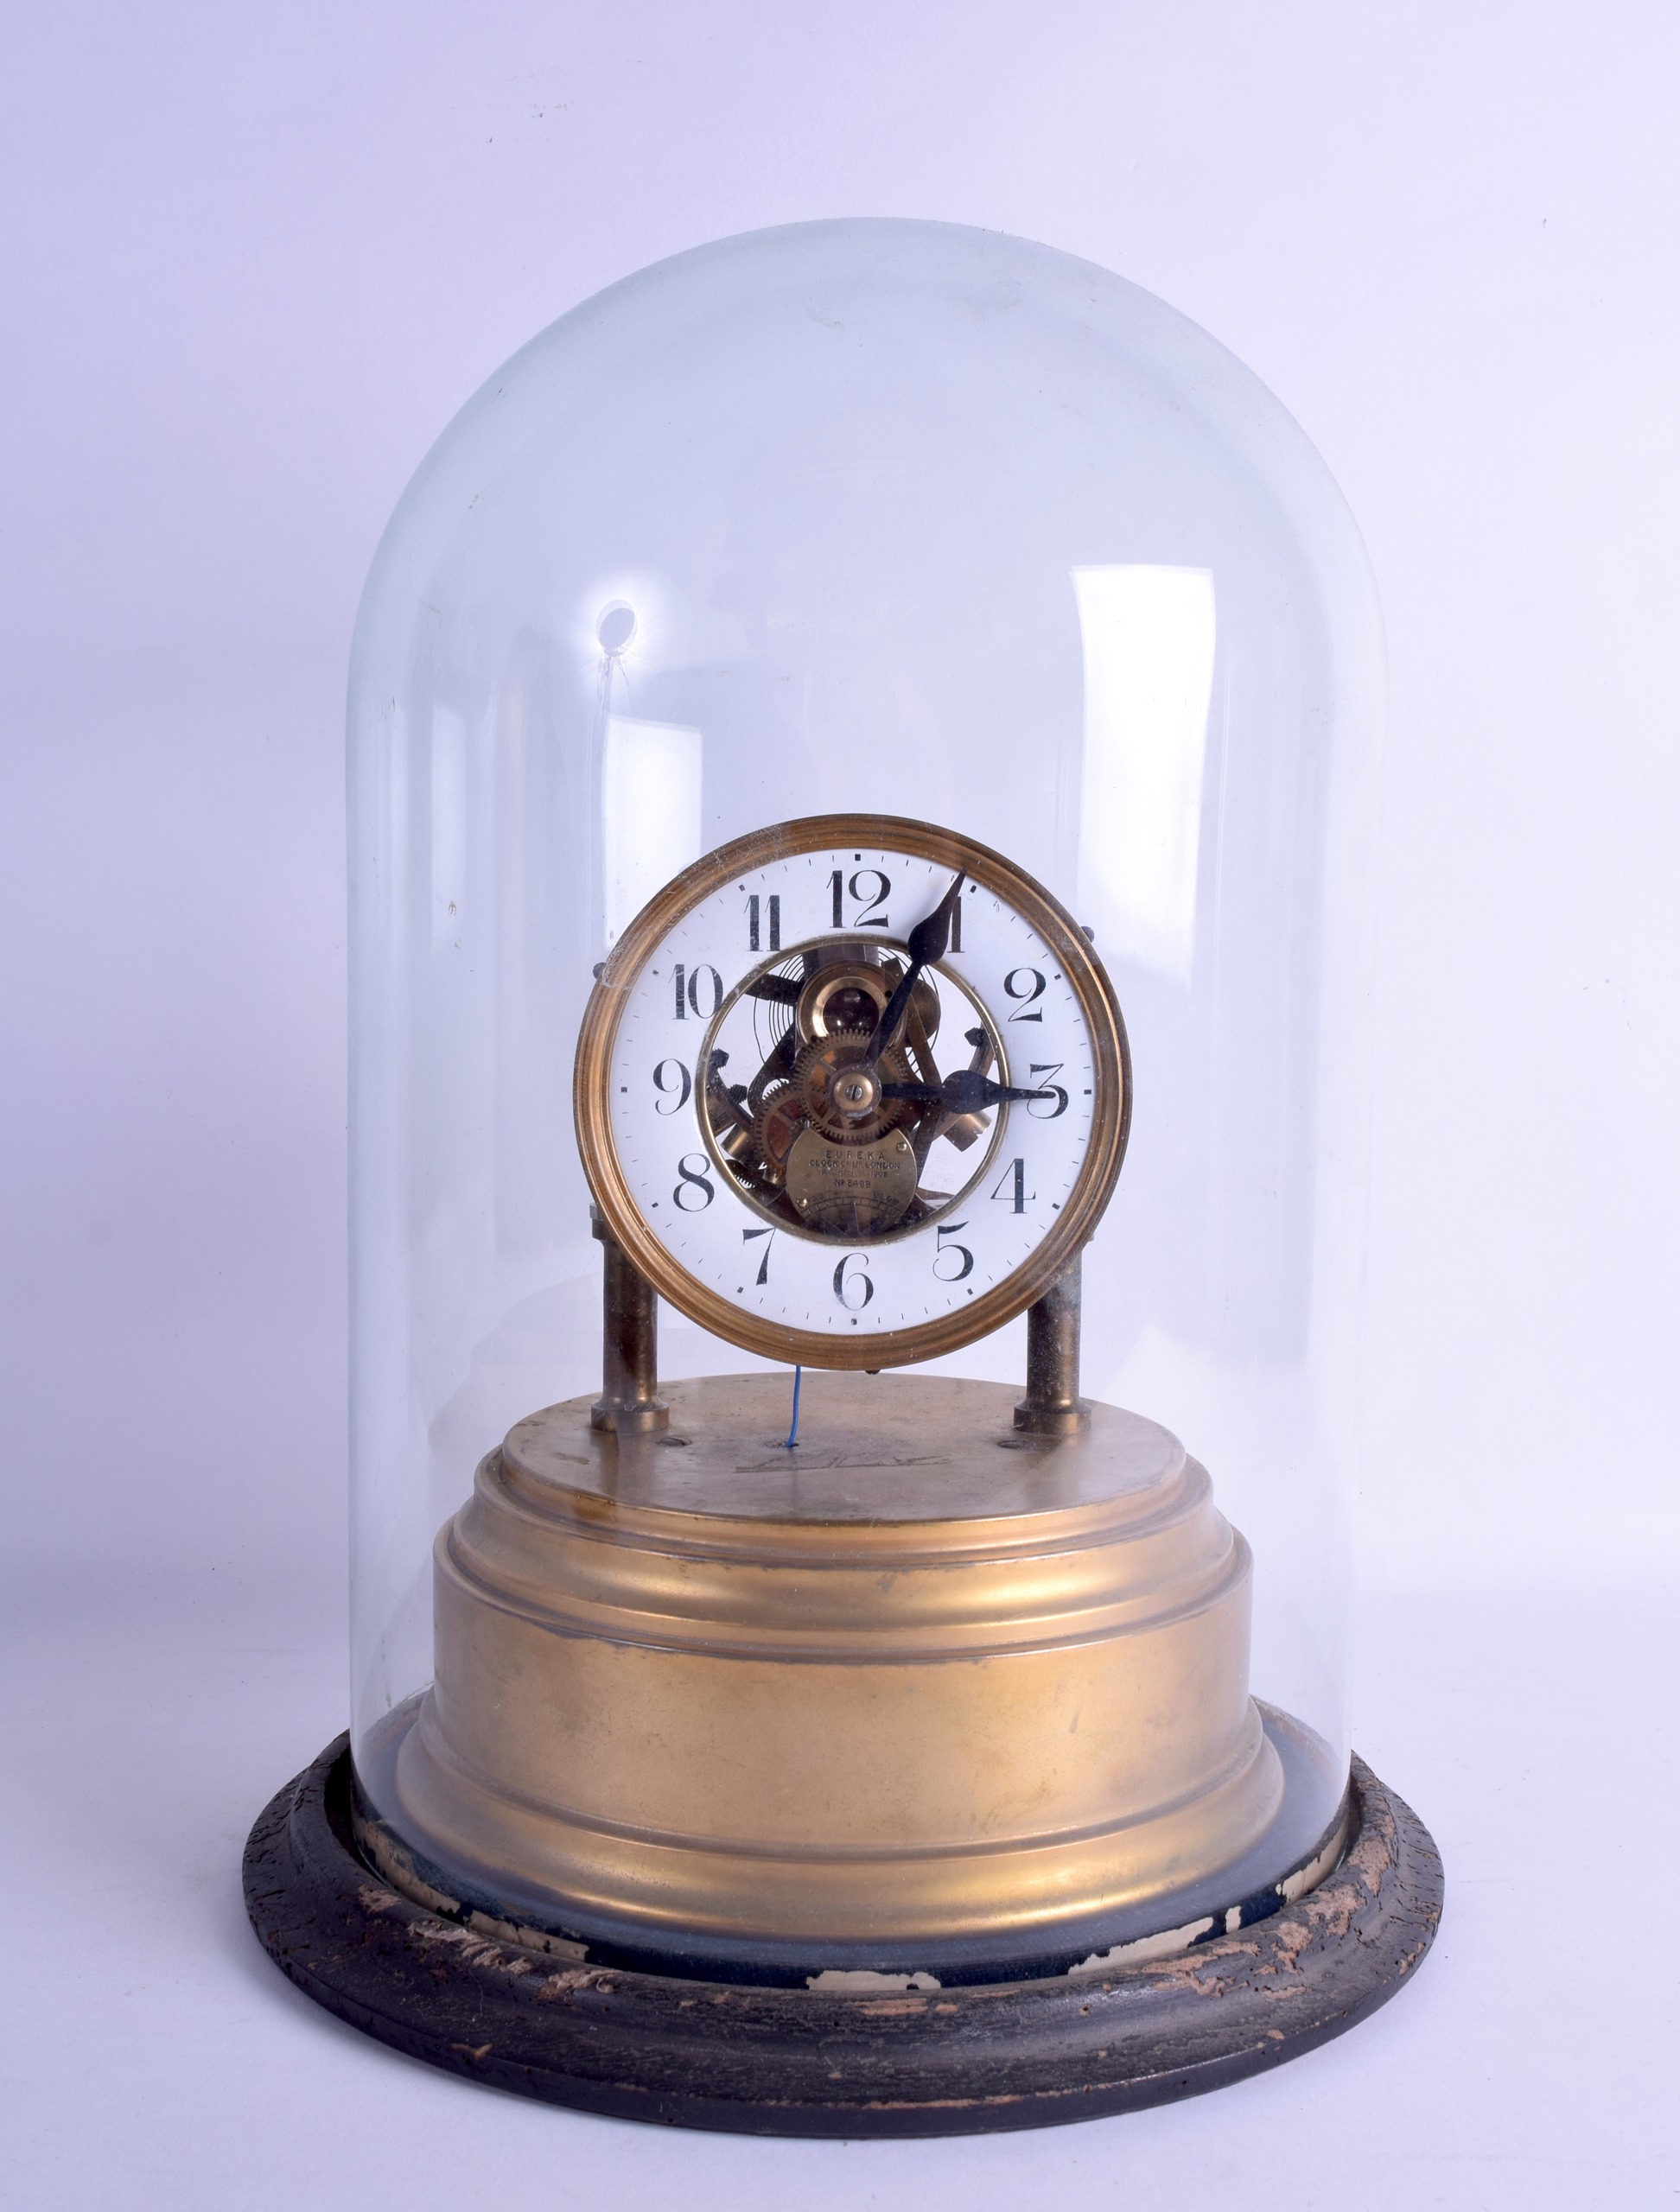 A RARE EUREKA CLOCK CO LONDON ATMOSPHERIC TYPE MANTEL CLOCK within a glass dome, number 3469, with